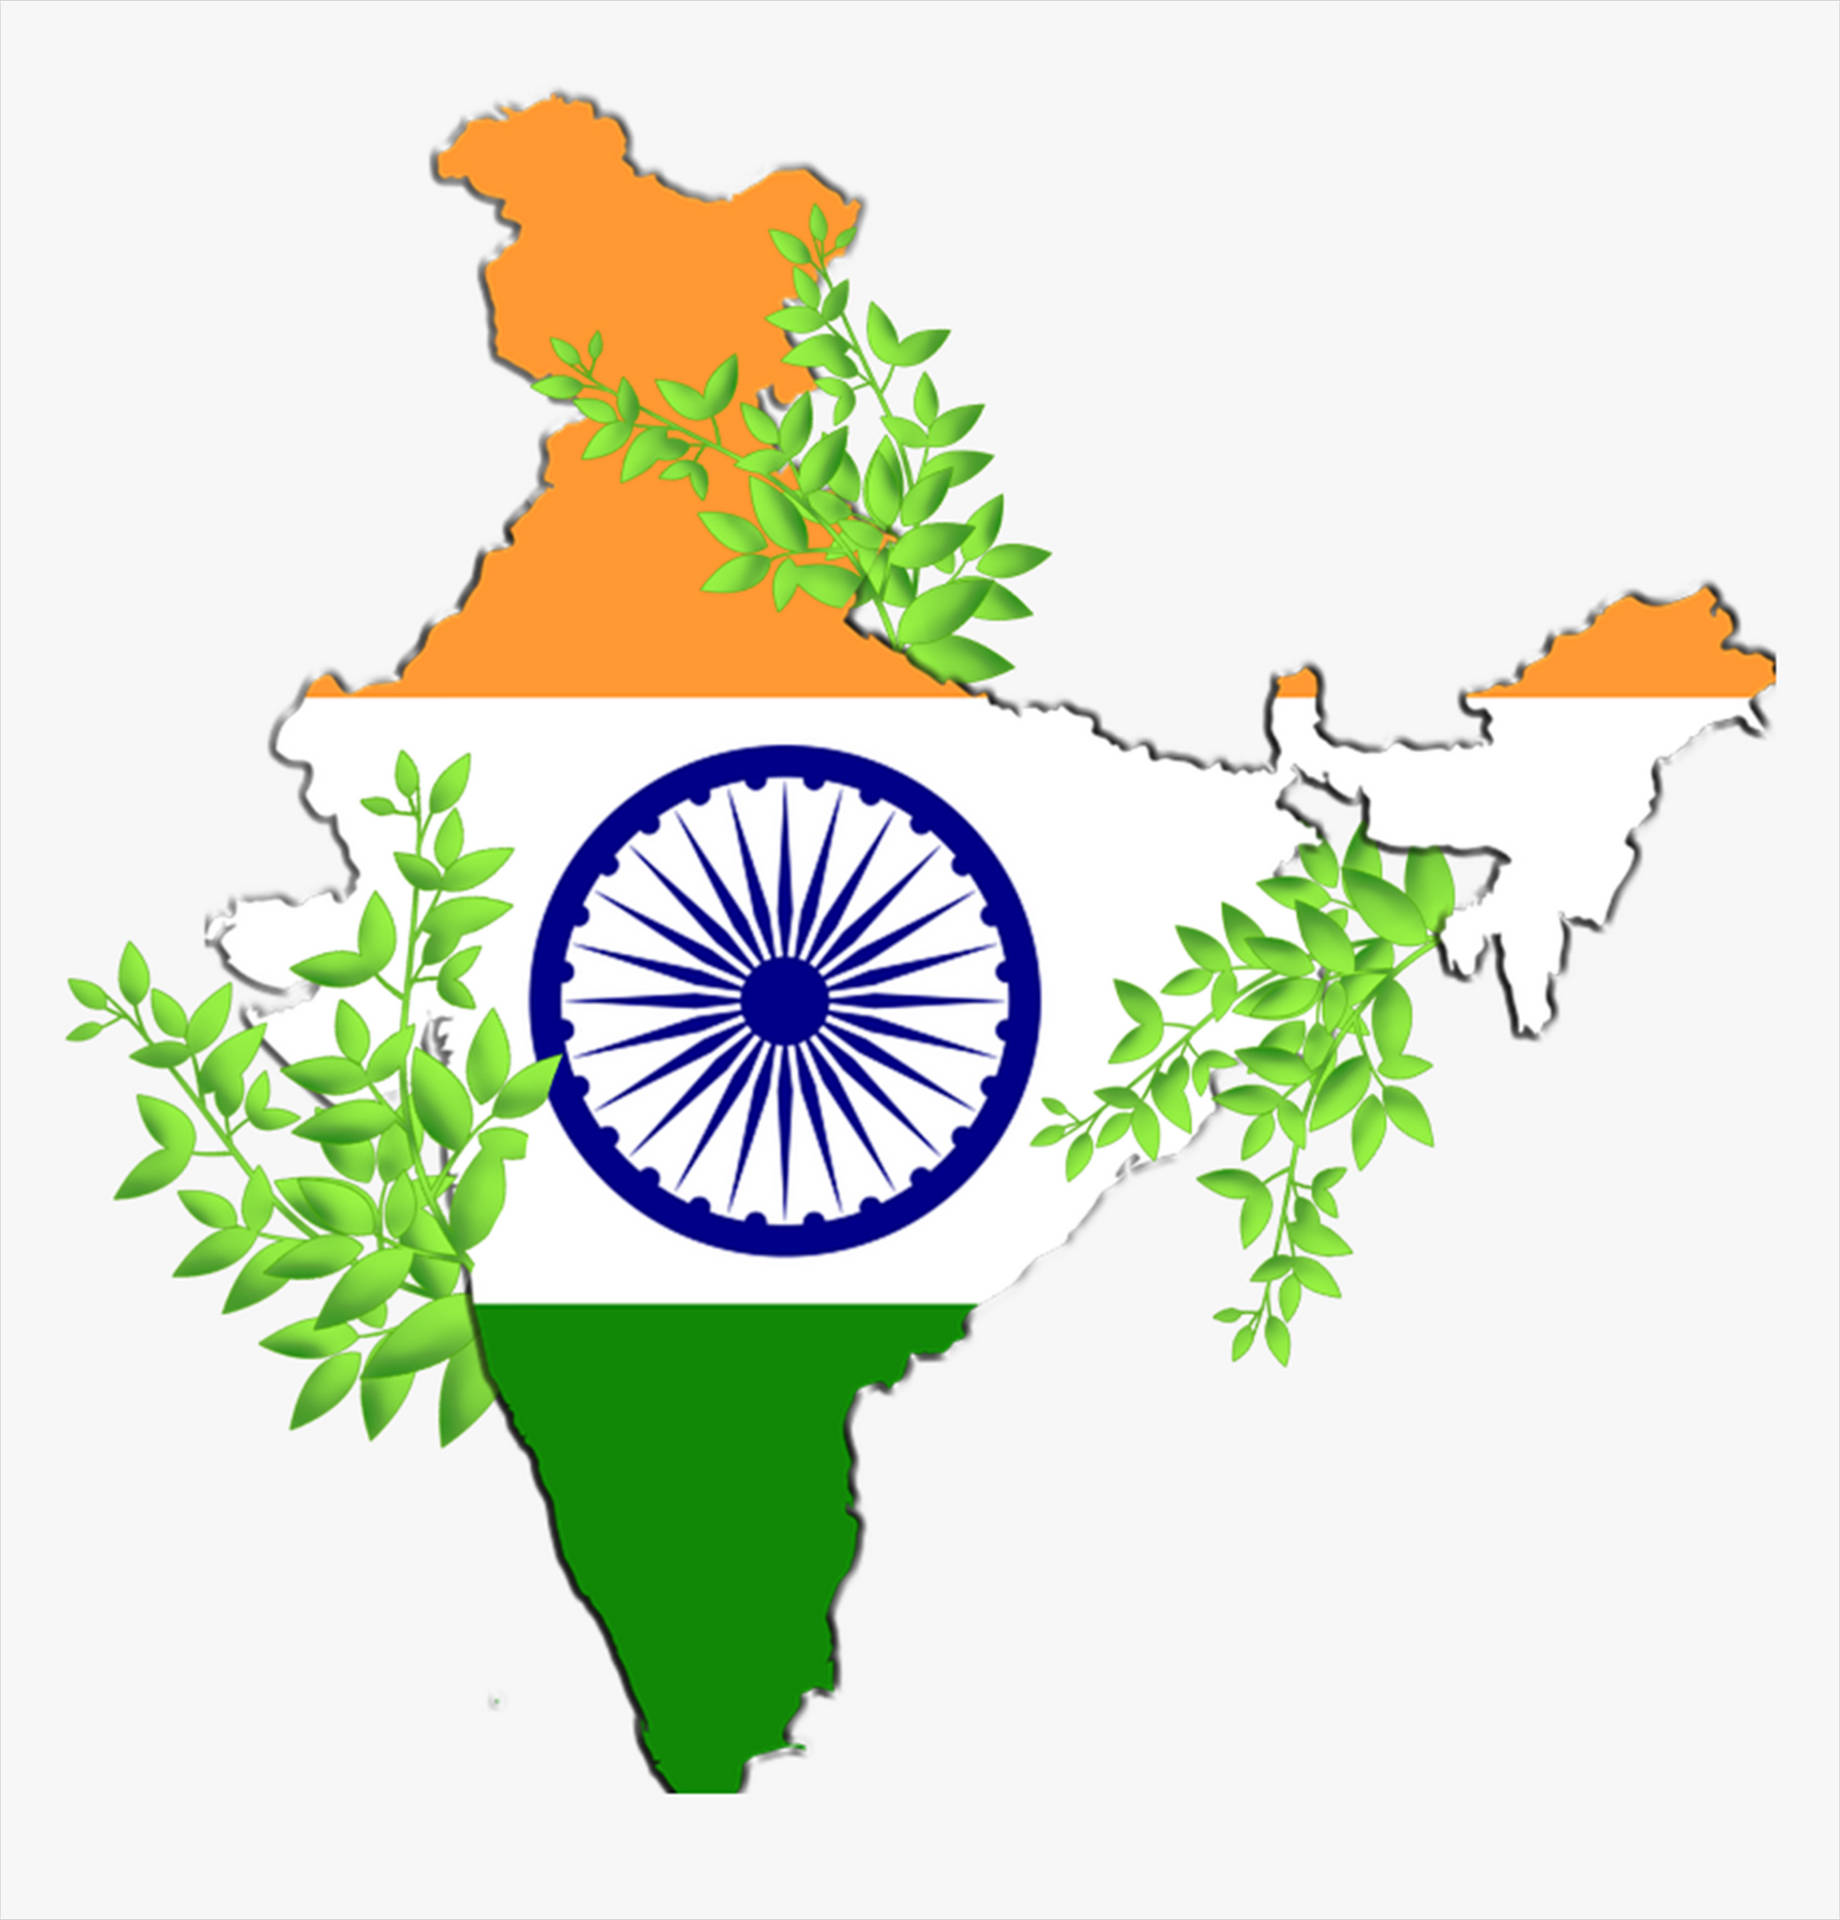 Free India Map Wallpaper Downloads, [100+] India Map Wallpapers for FREE |  